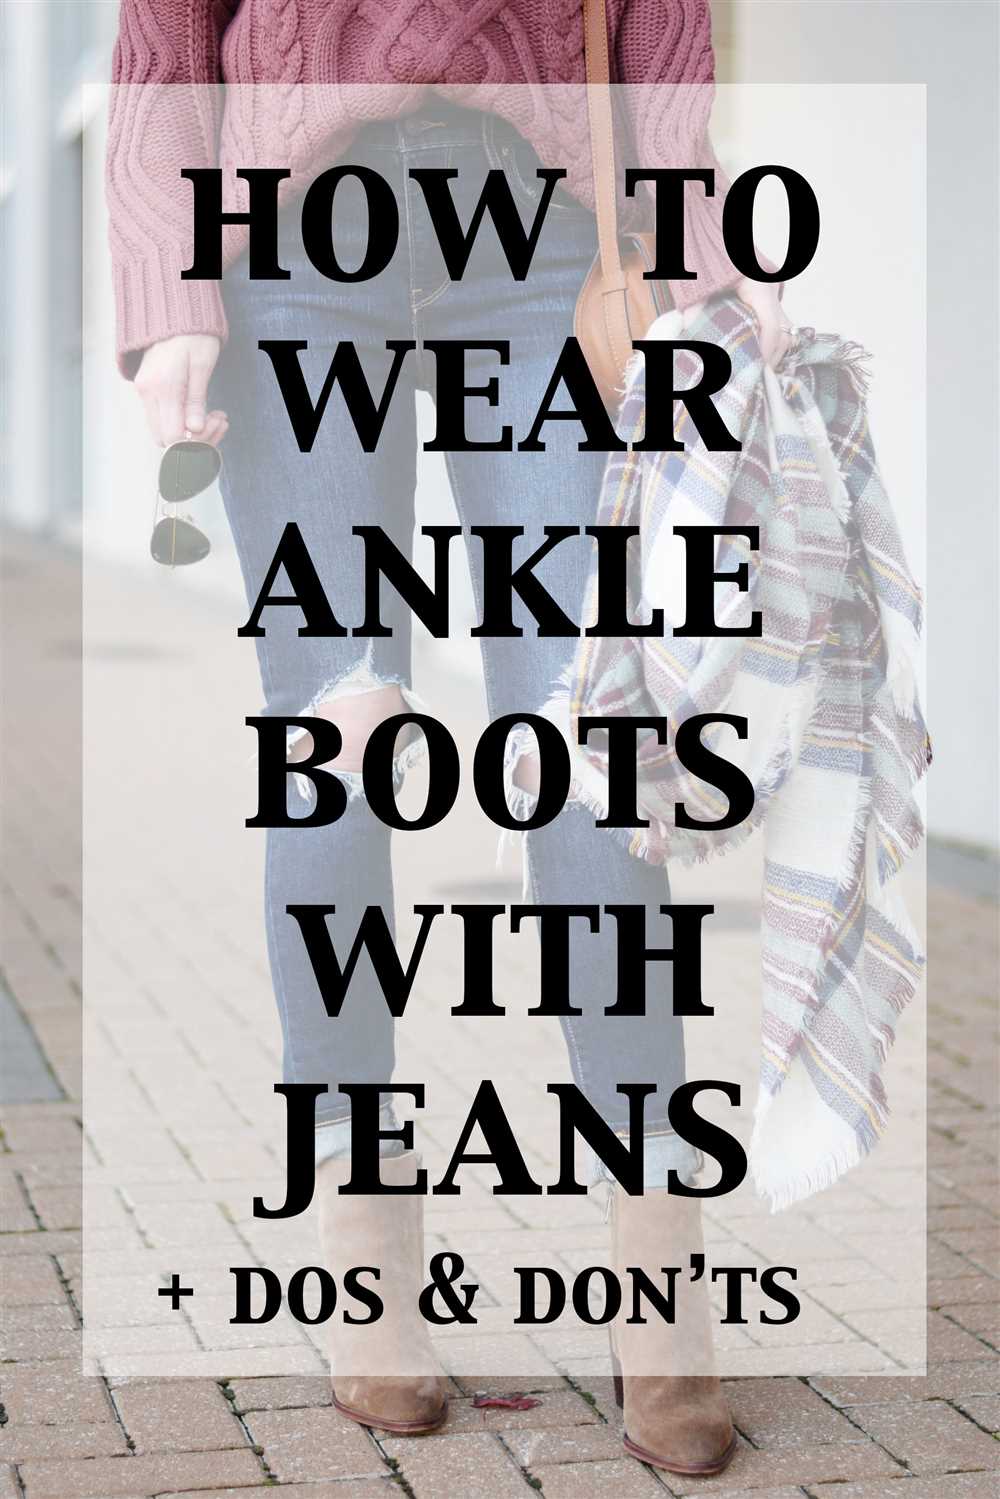 Dressing Up Short Boots and Jeans for a Night Out